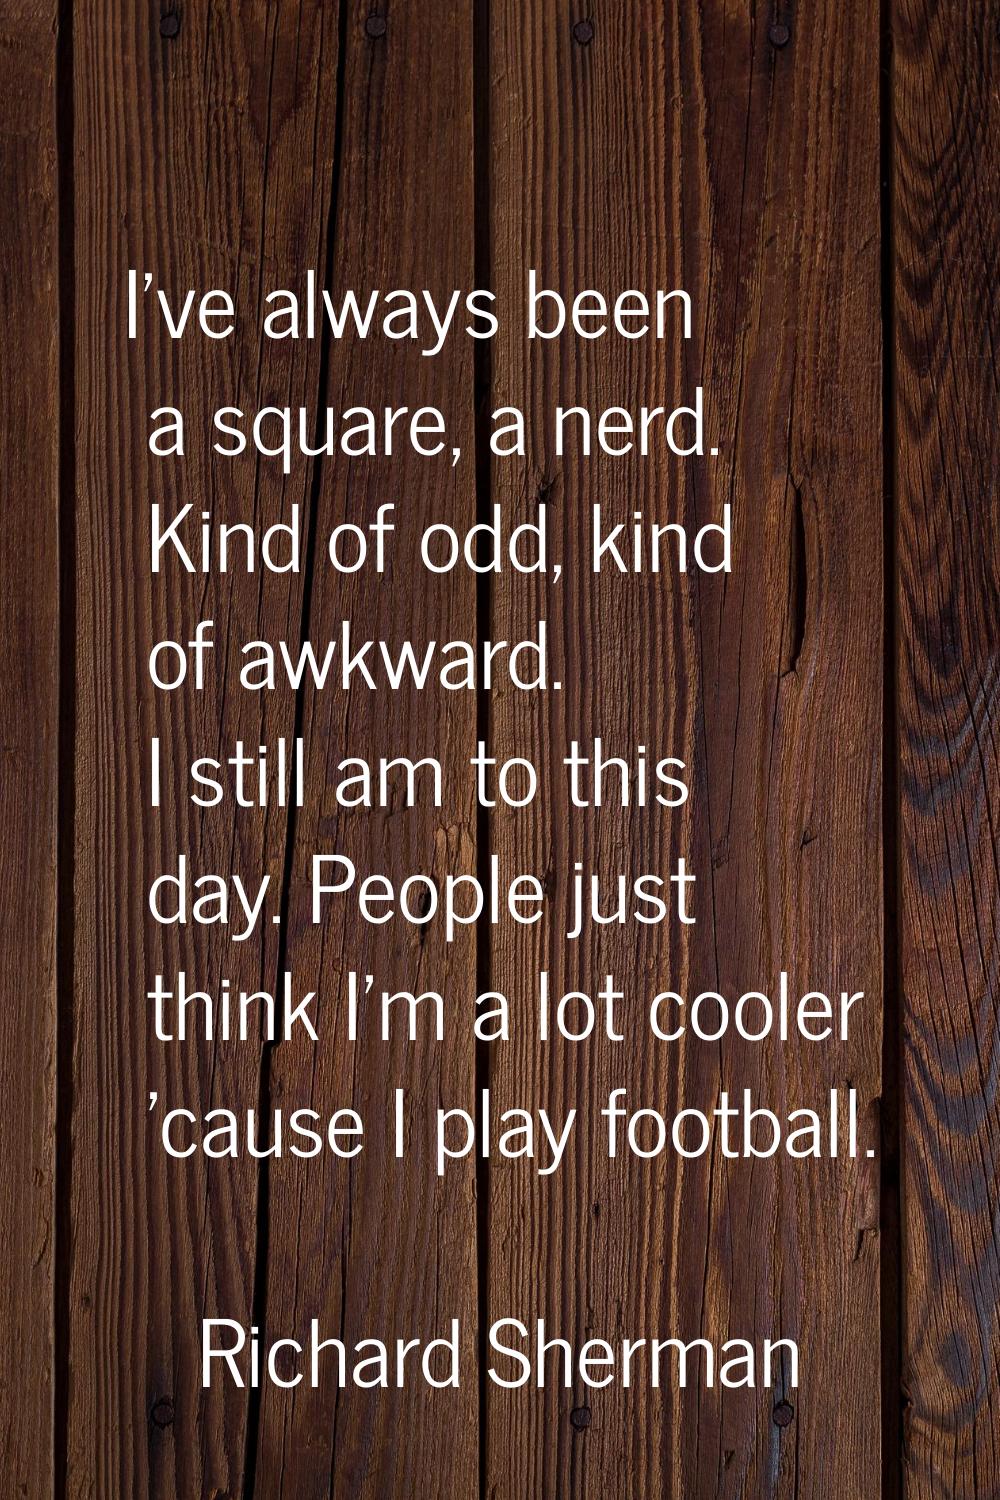 I've always been a square, a nerd. Kind of odd, kind of awkward. I still am to this day. People jus